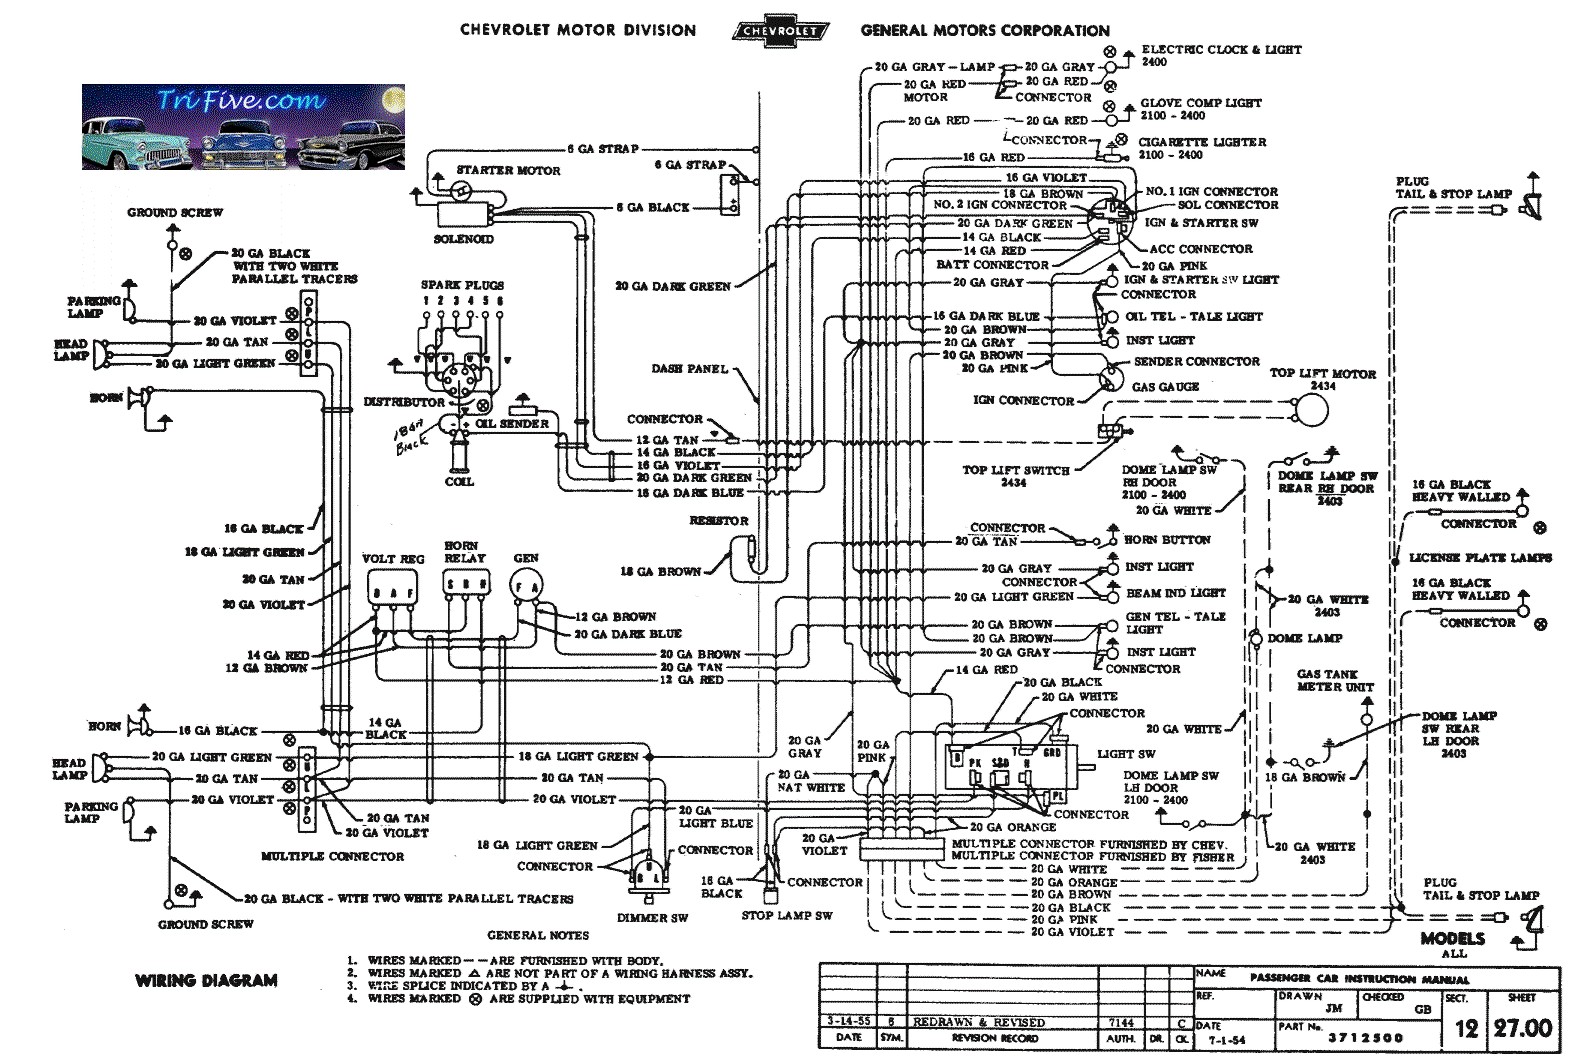 air wiring diagram 57 chevrolet free image about wiring diagram rh sellfie co